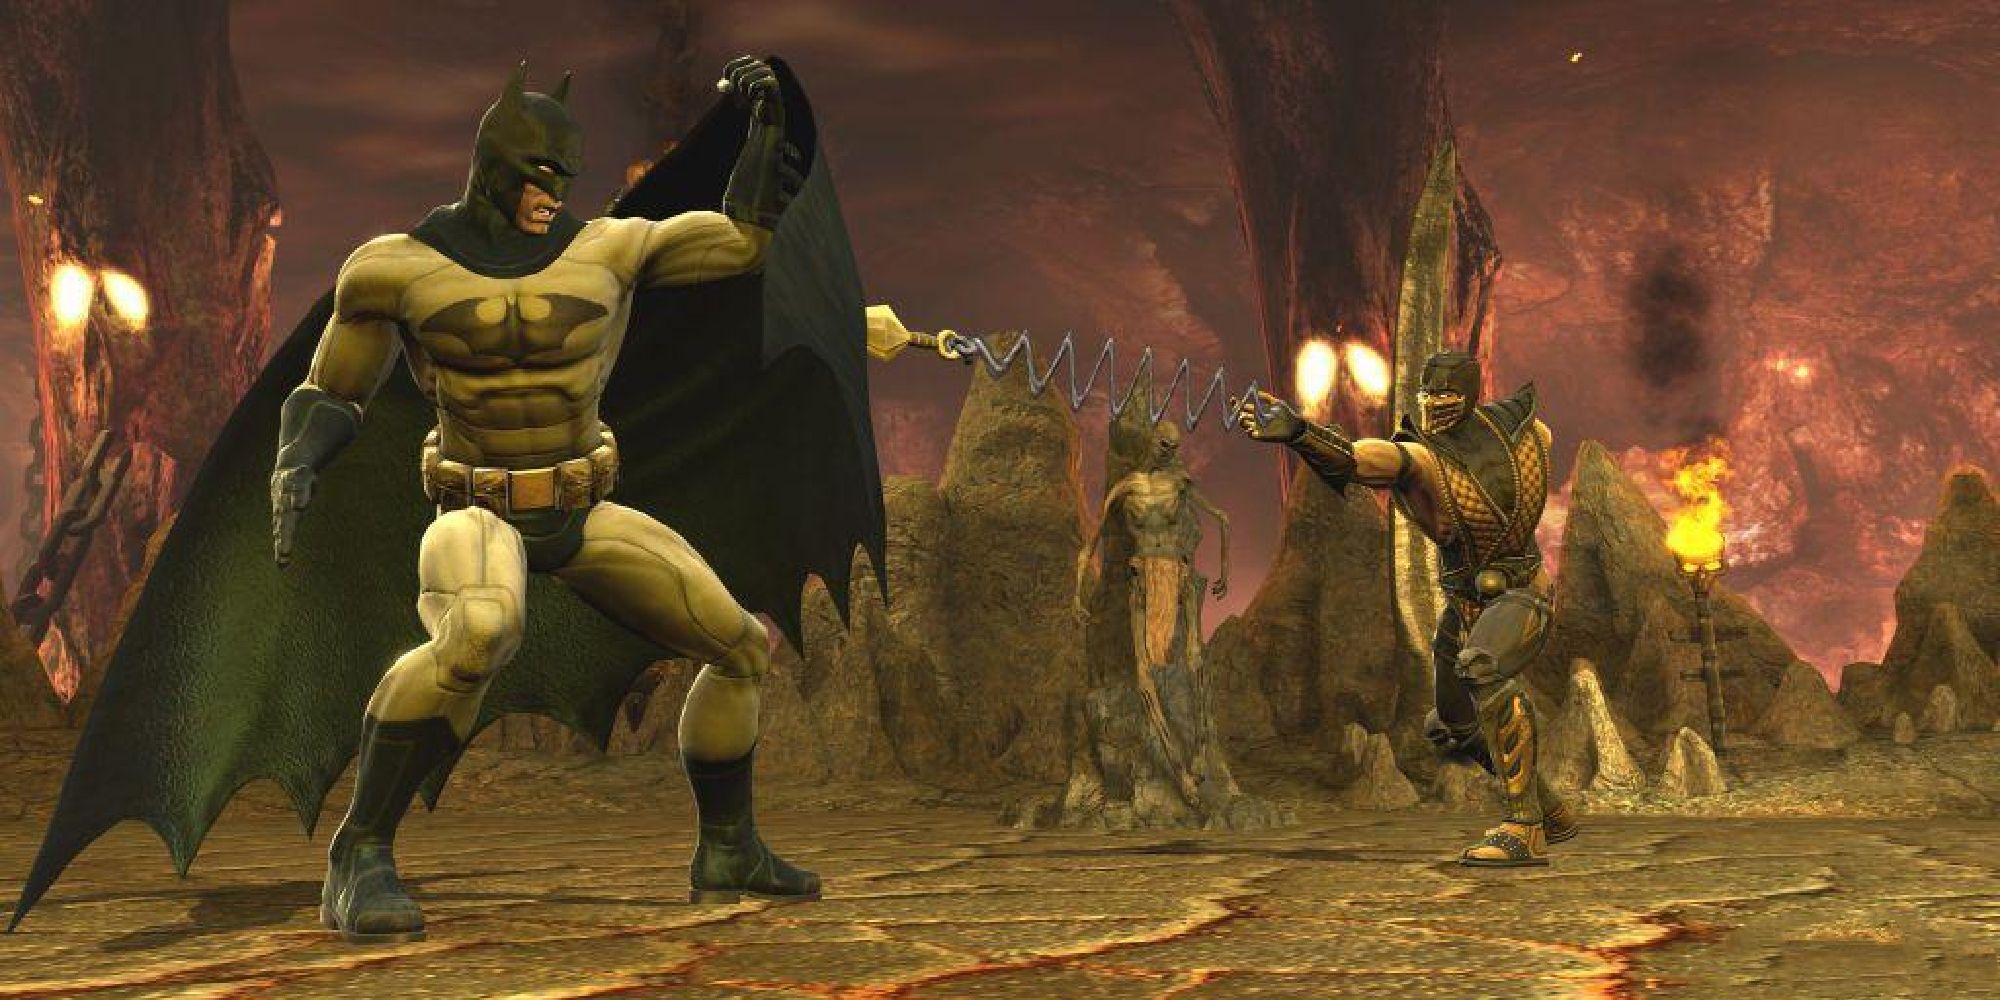 Should a Future Injustice Game Lead to a Crossover with Mortal Kombat? -  Video & Board Games - DC Community